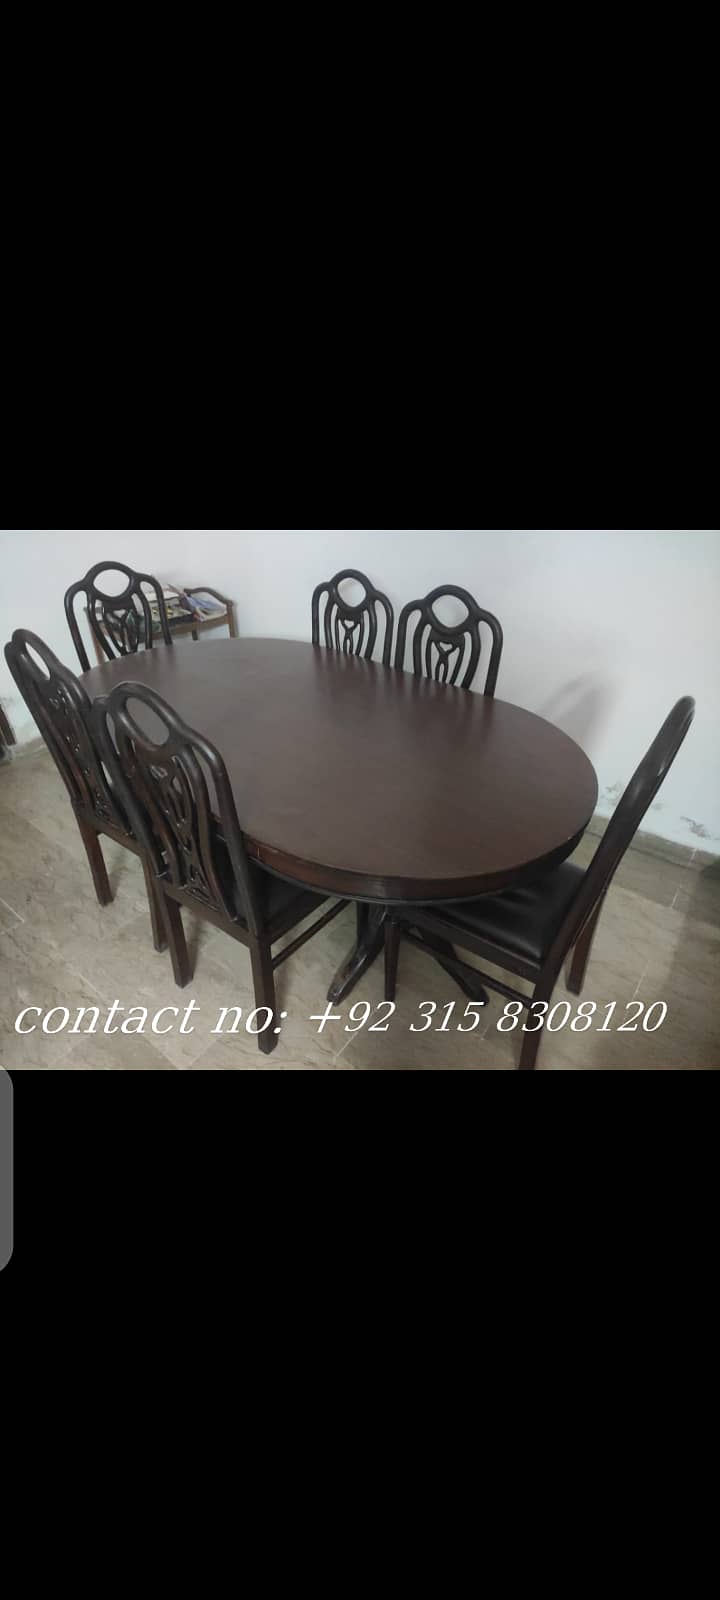 Table for 6 under 30000 Rs, wooden dining table in good condition. 3